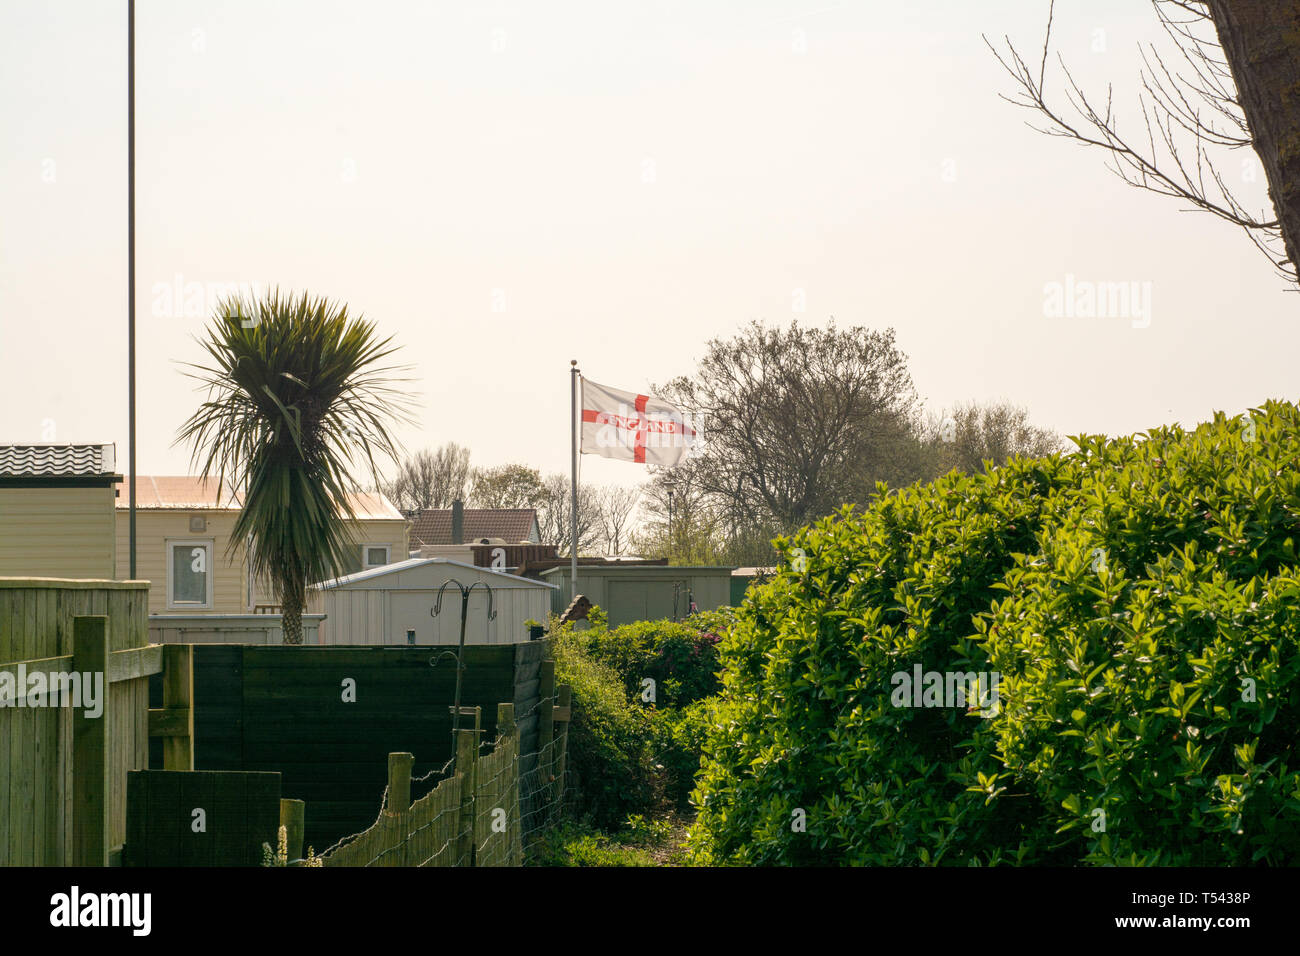 Cloudy skies cover a caravan park in spring time as a England flag flys. Stock Photo